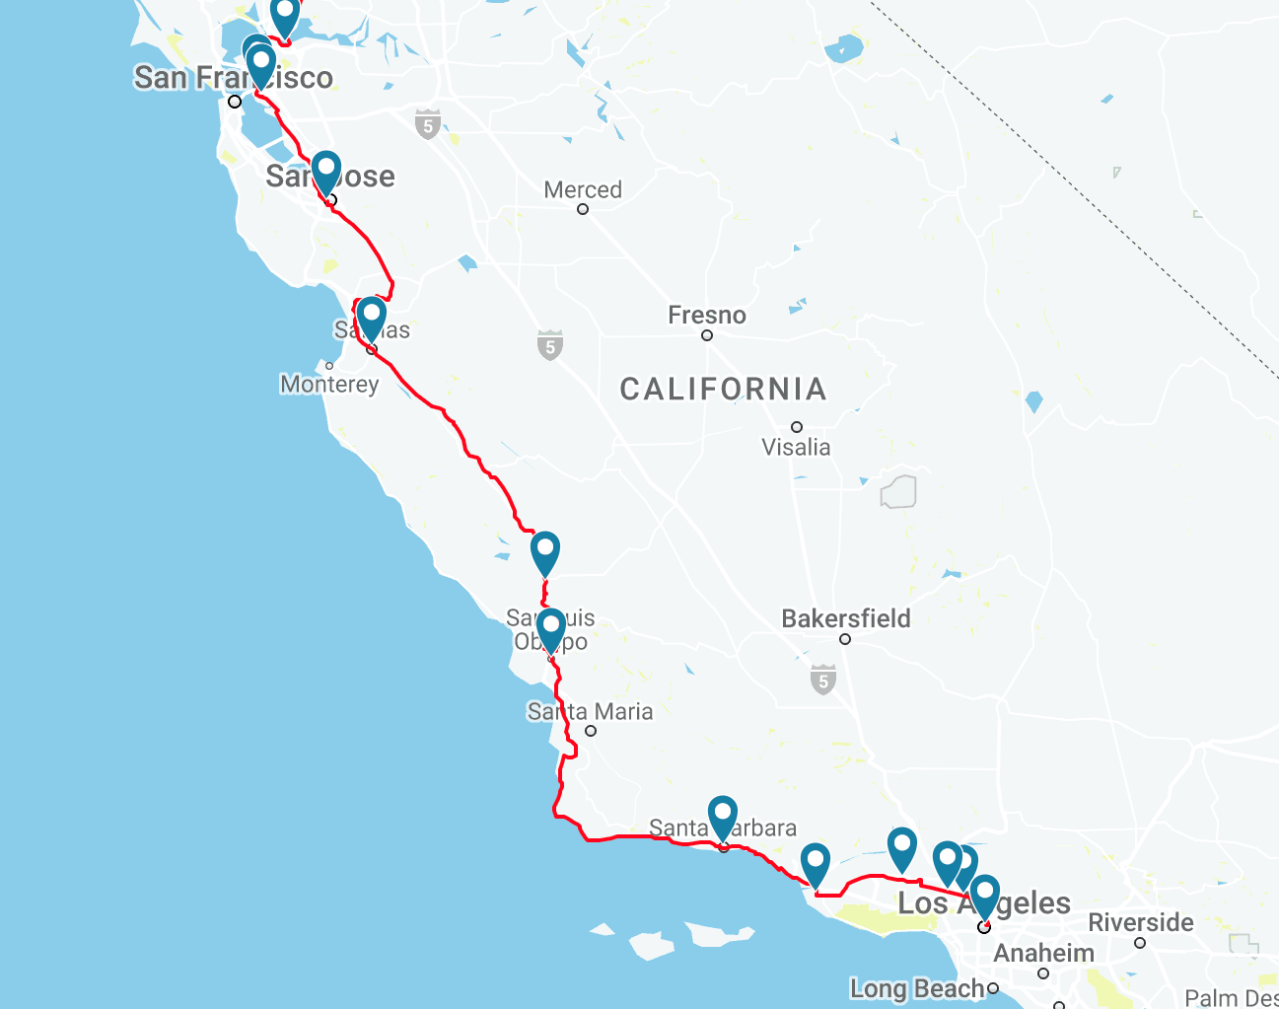 The Coast Starlight route between LA and the Bay Area. Image: Amtrak